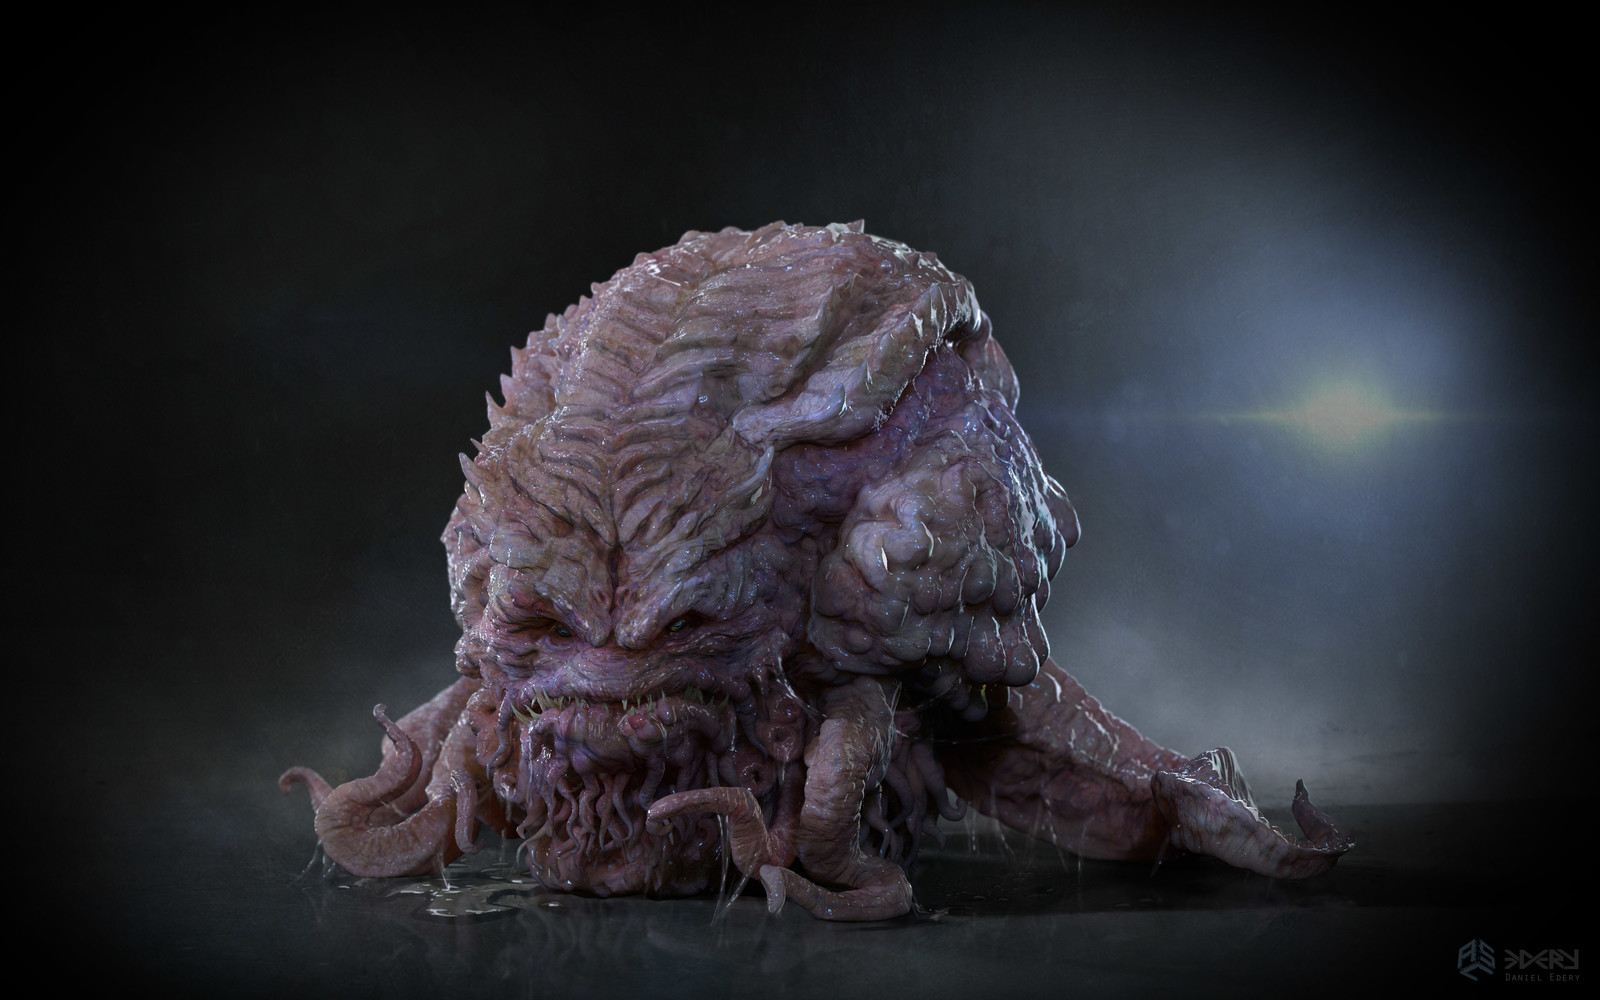 Final Krang design featured in the film